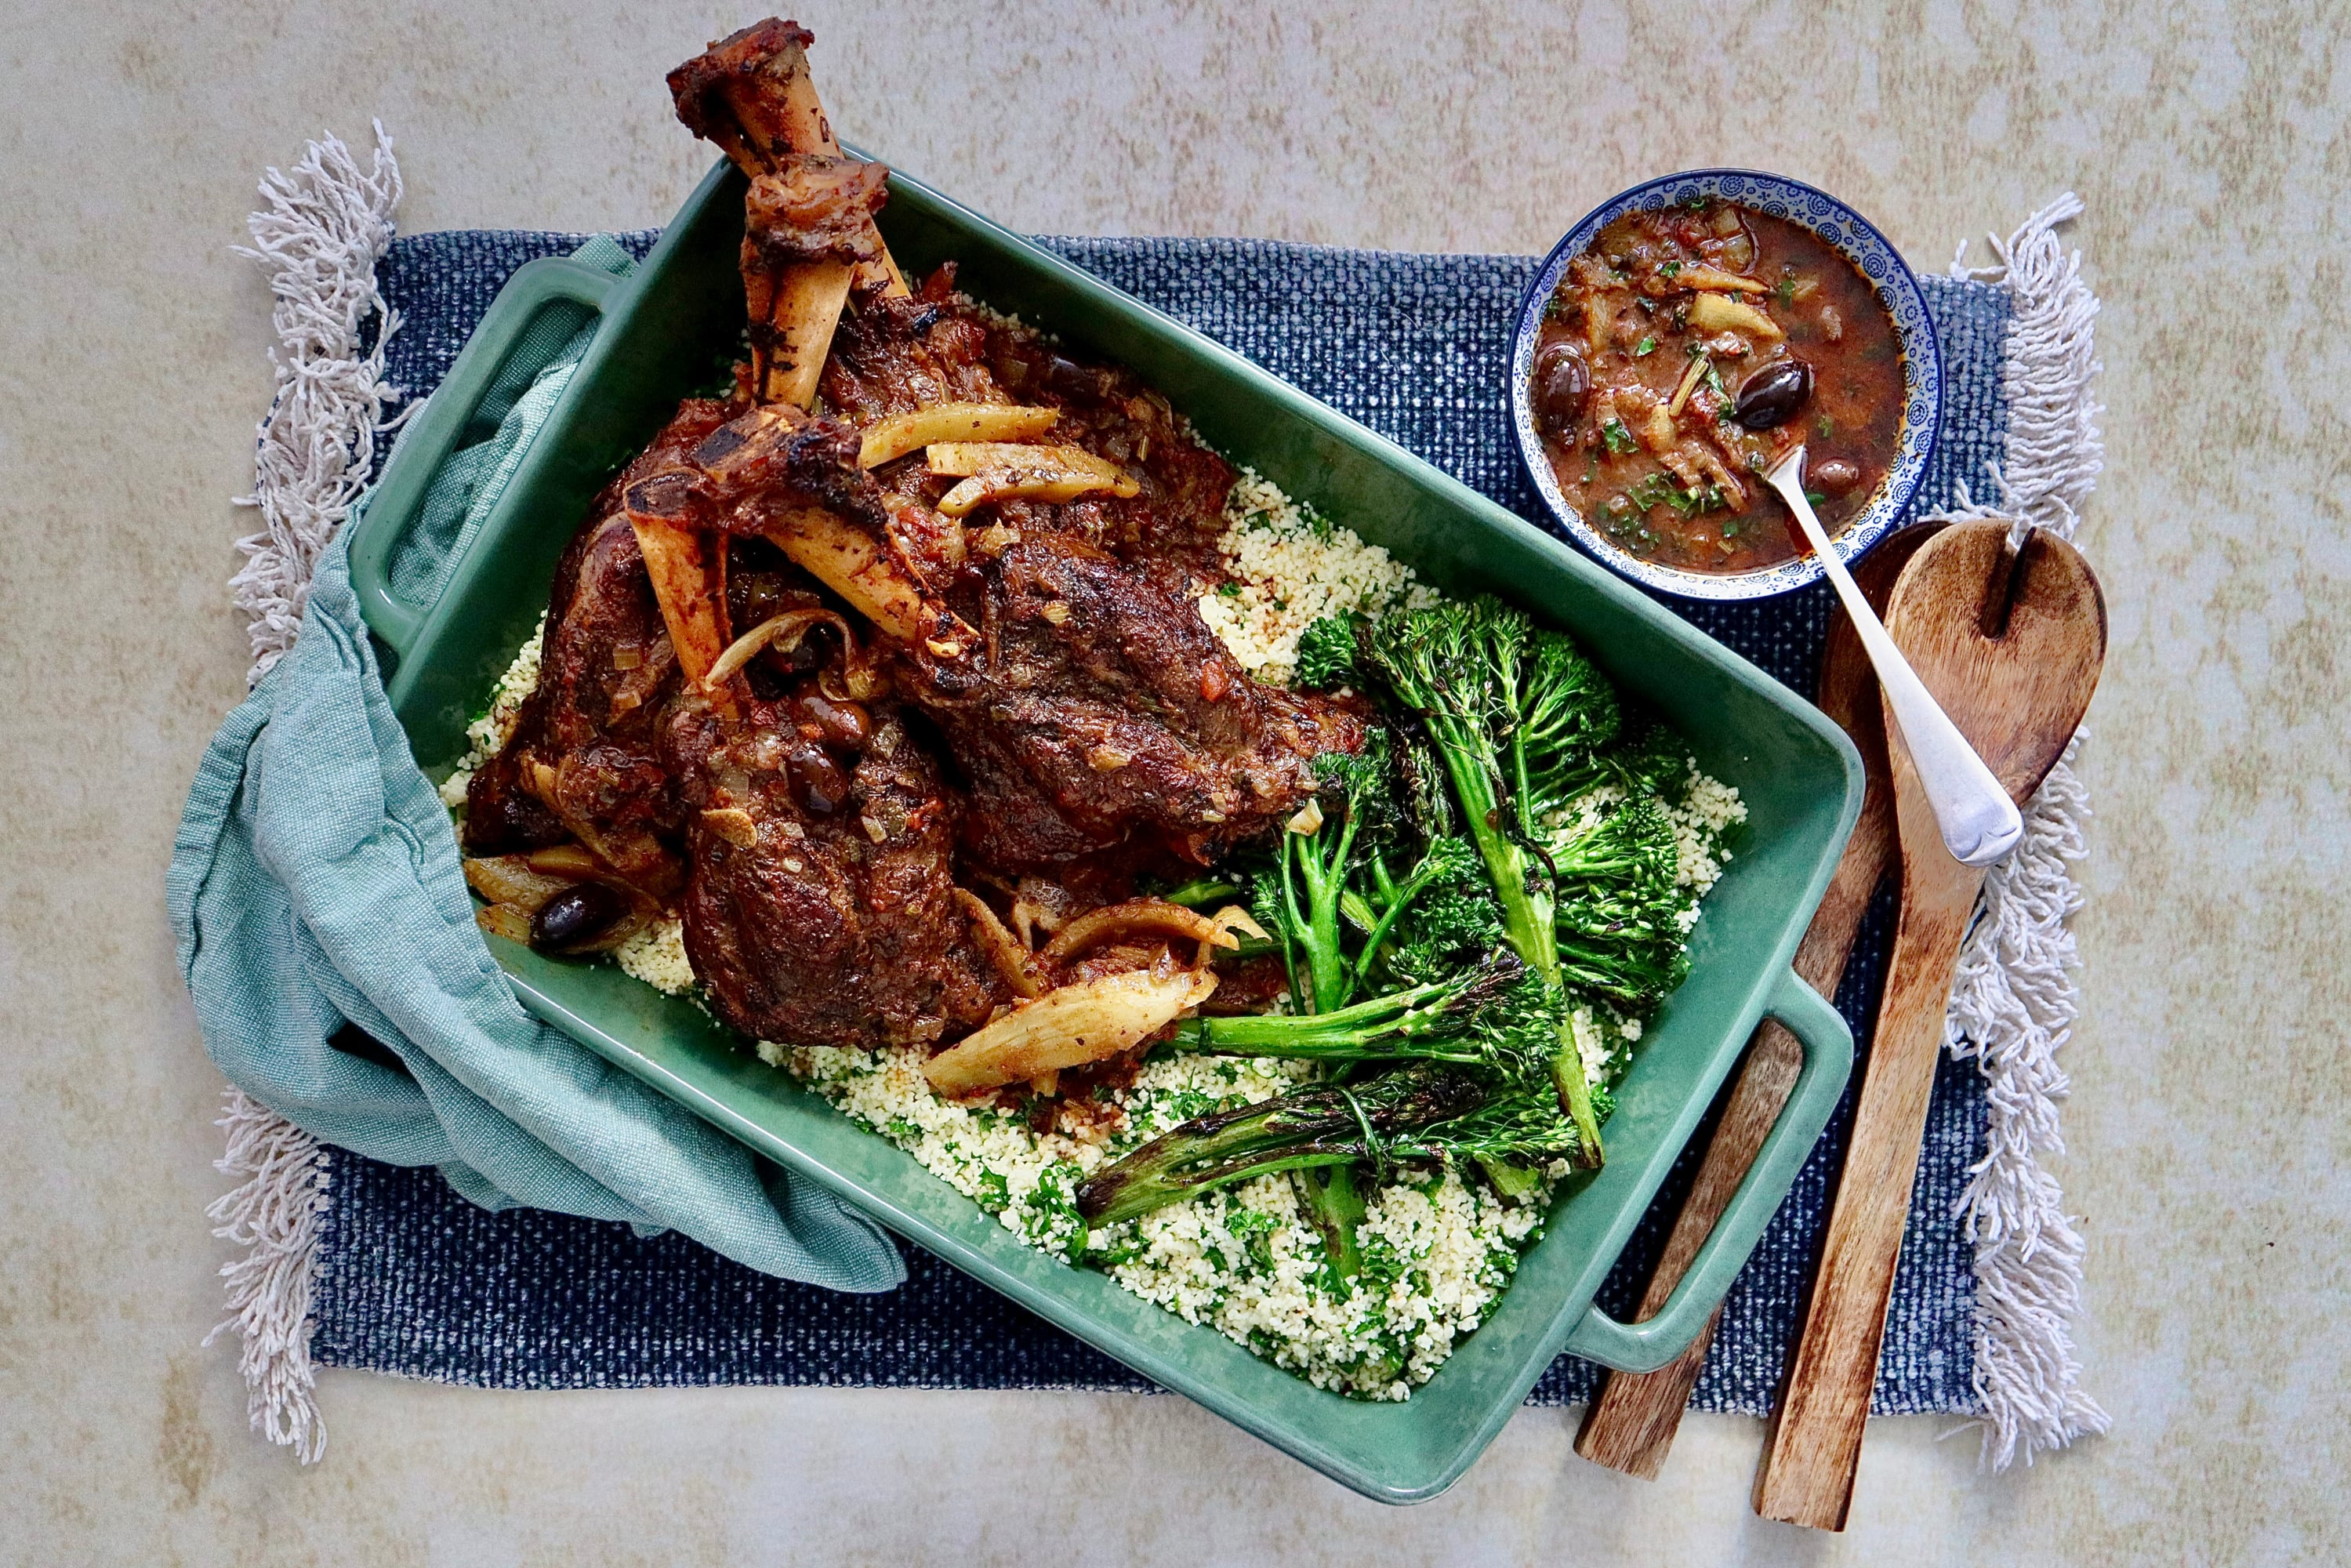 Moroccan style lamb shanks on a bed of herbed couscous and grilled broccolini